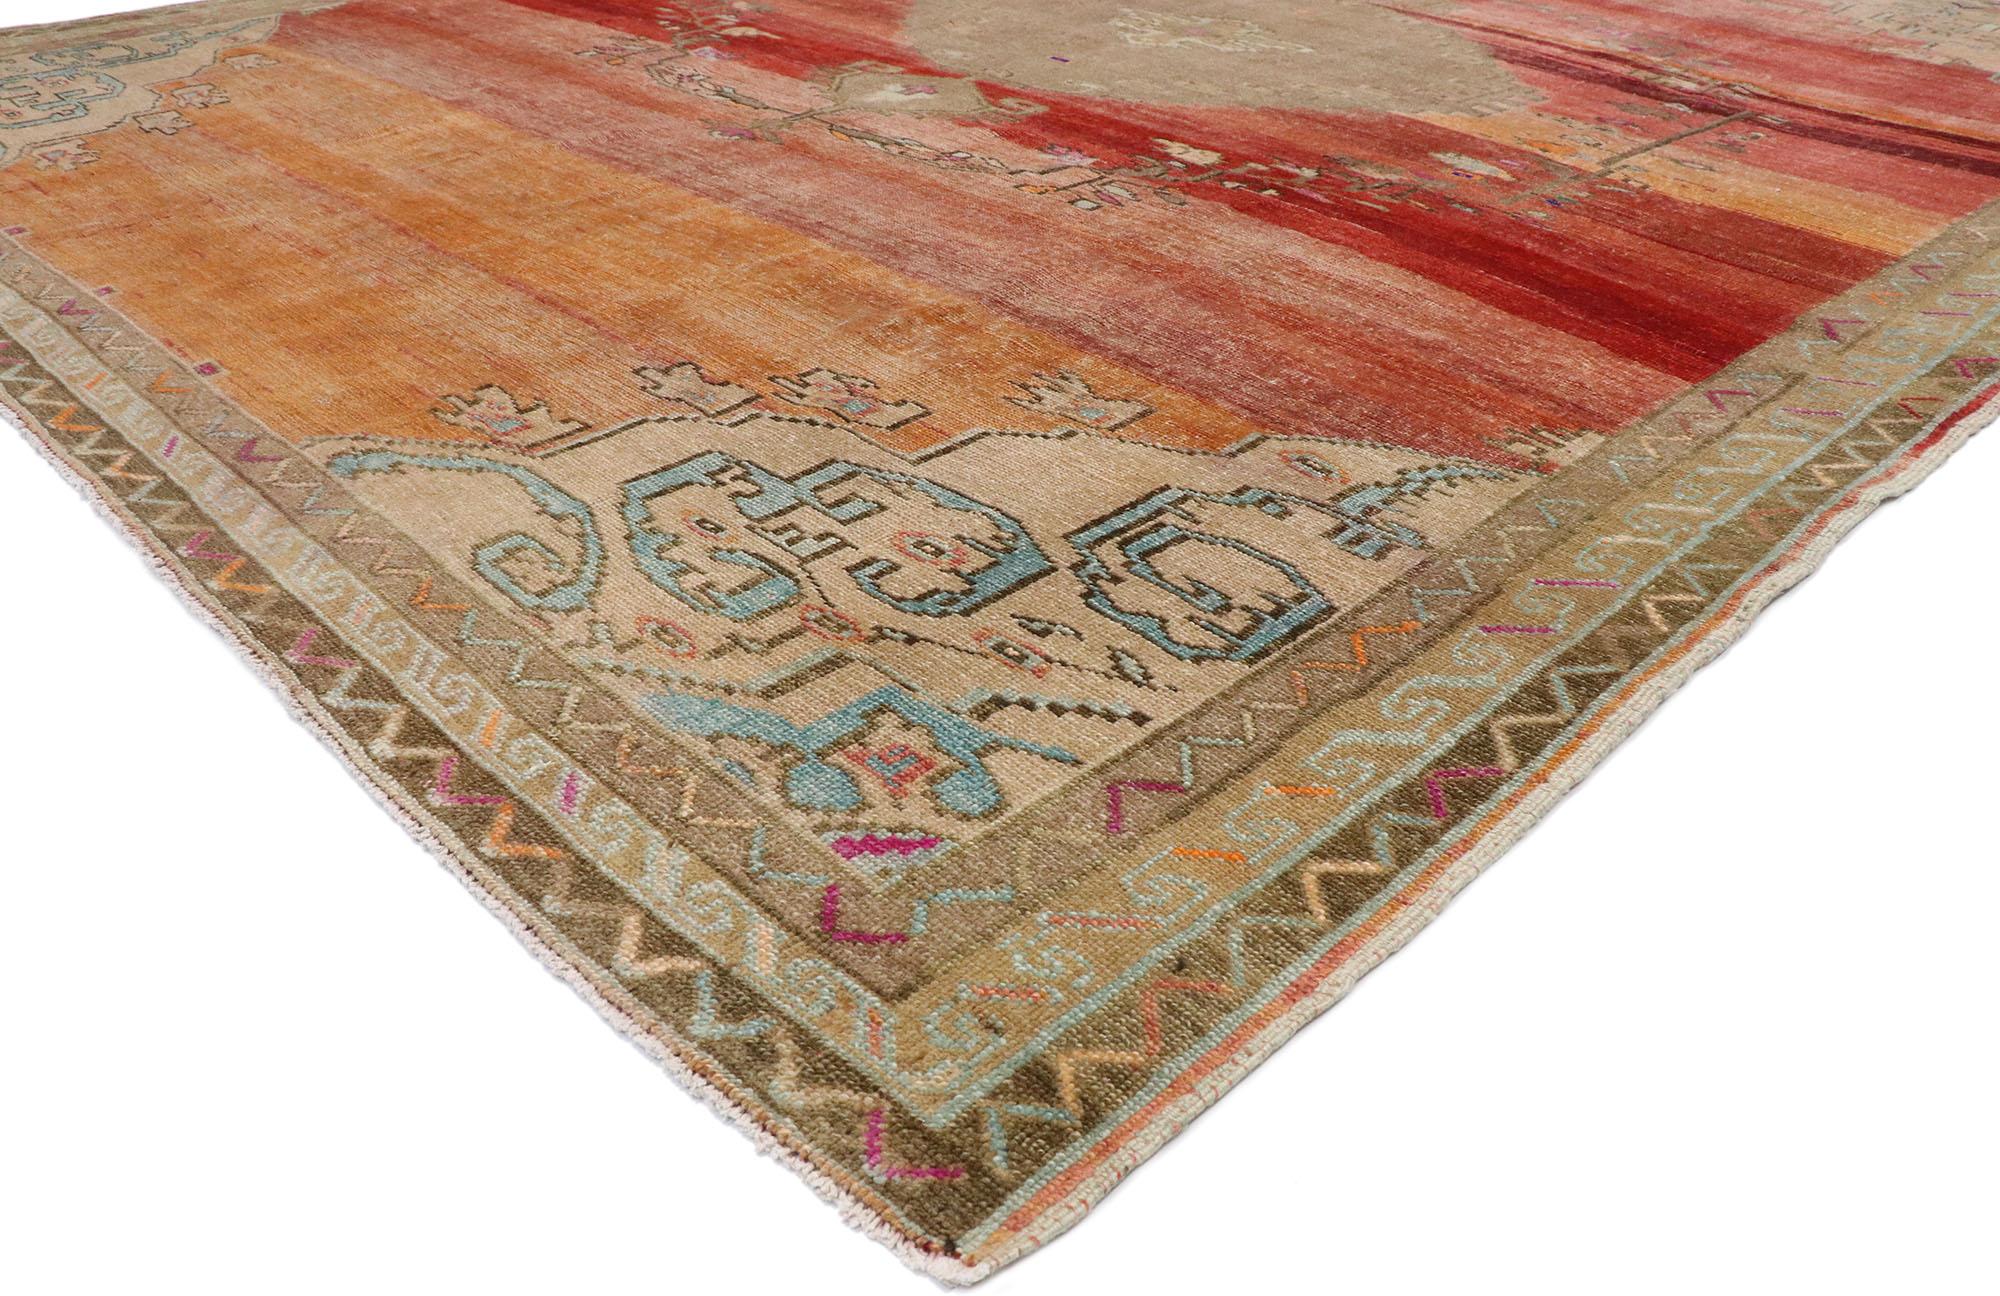 53400 Vintage Turkish Kars Rug with Medieval Style 10'10 x 13'02.
With its luminous warm hues and beguiling beauty, this hand-knotted wool vintage Turkish Kars rug will take on a curated lived-in look that feels timeless while imparting a sense of